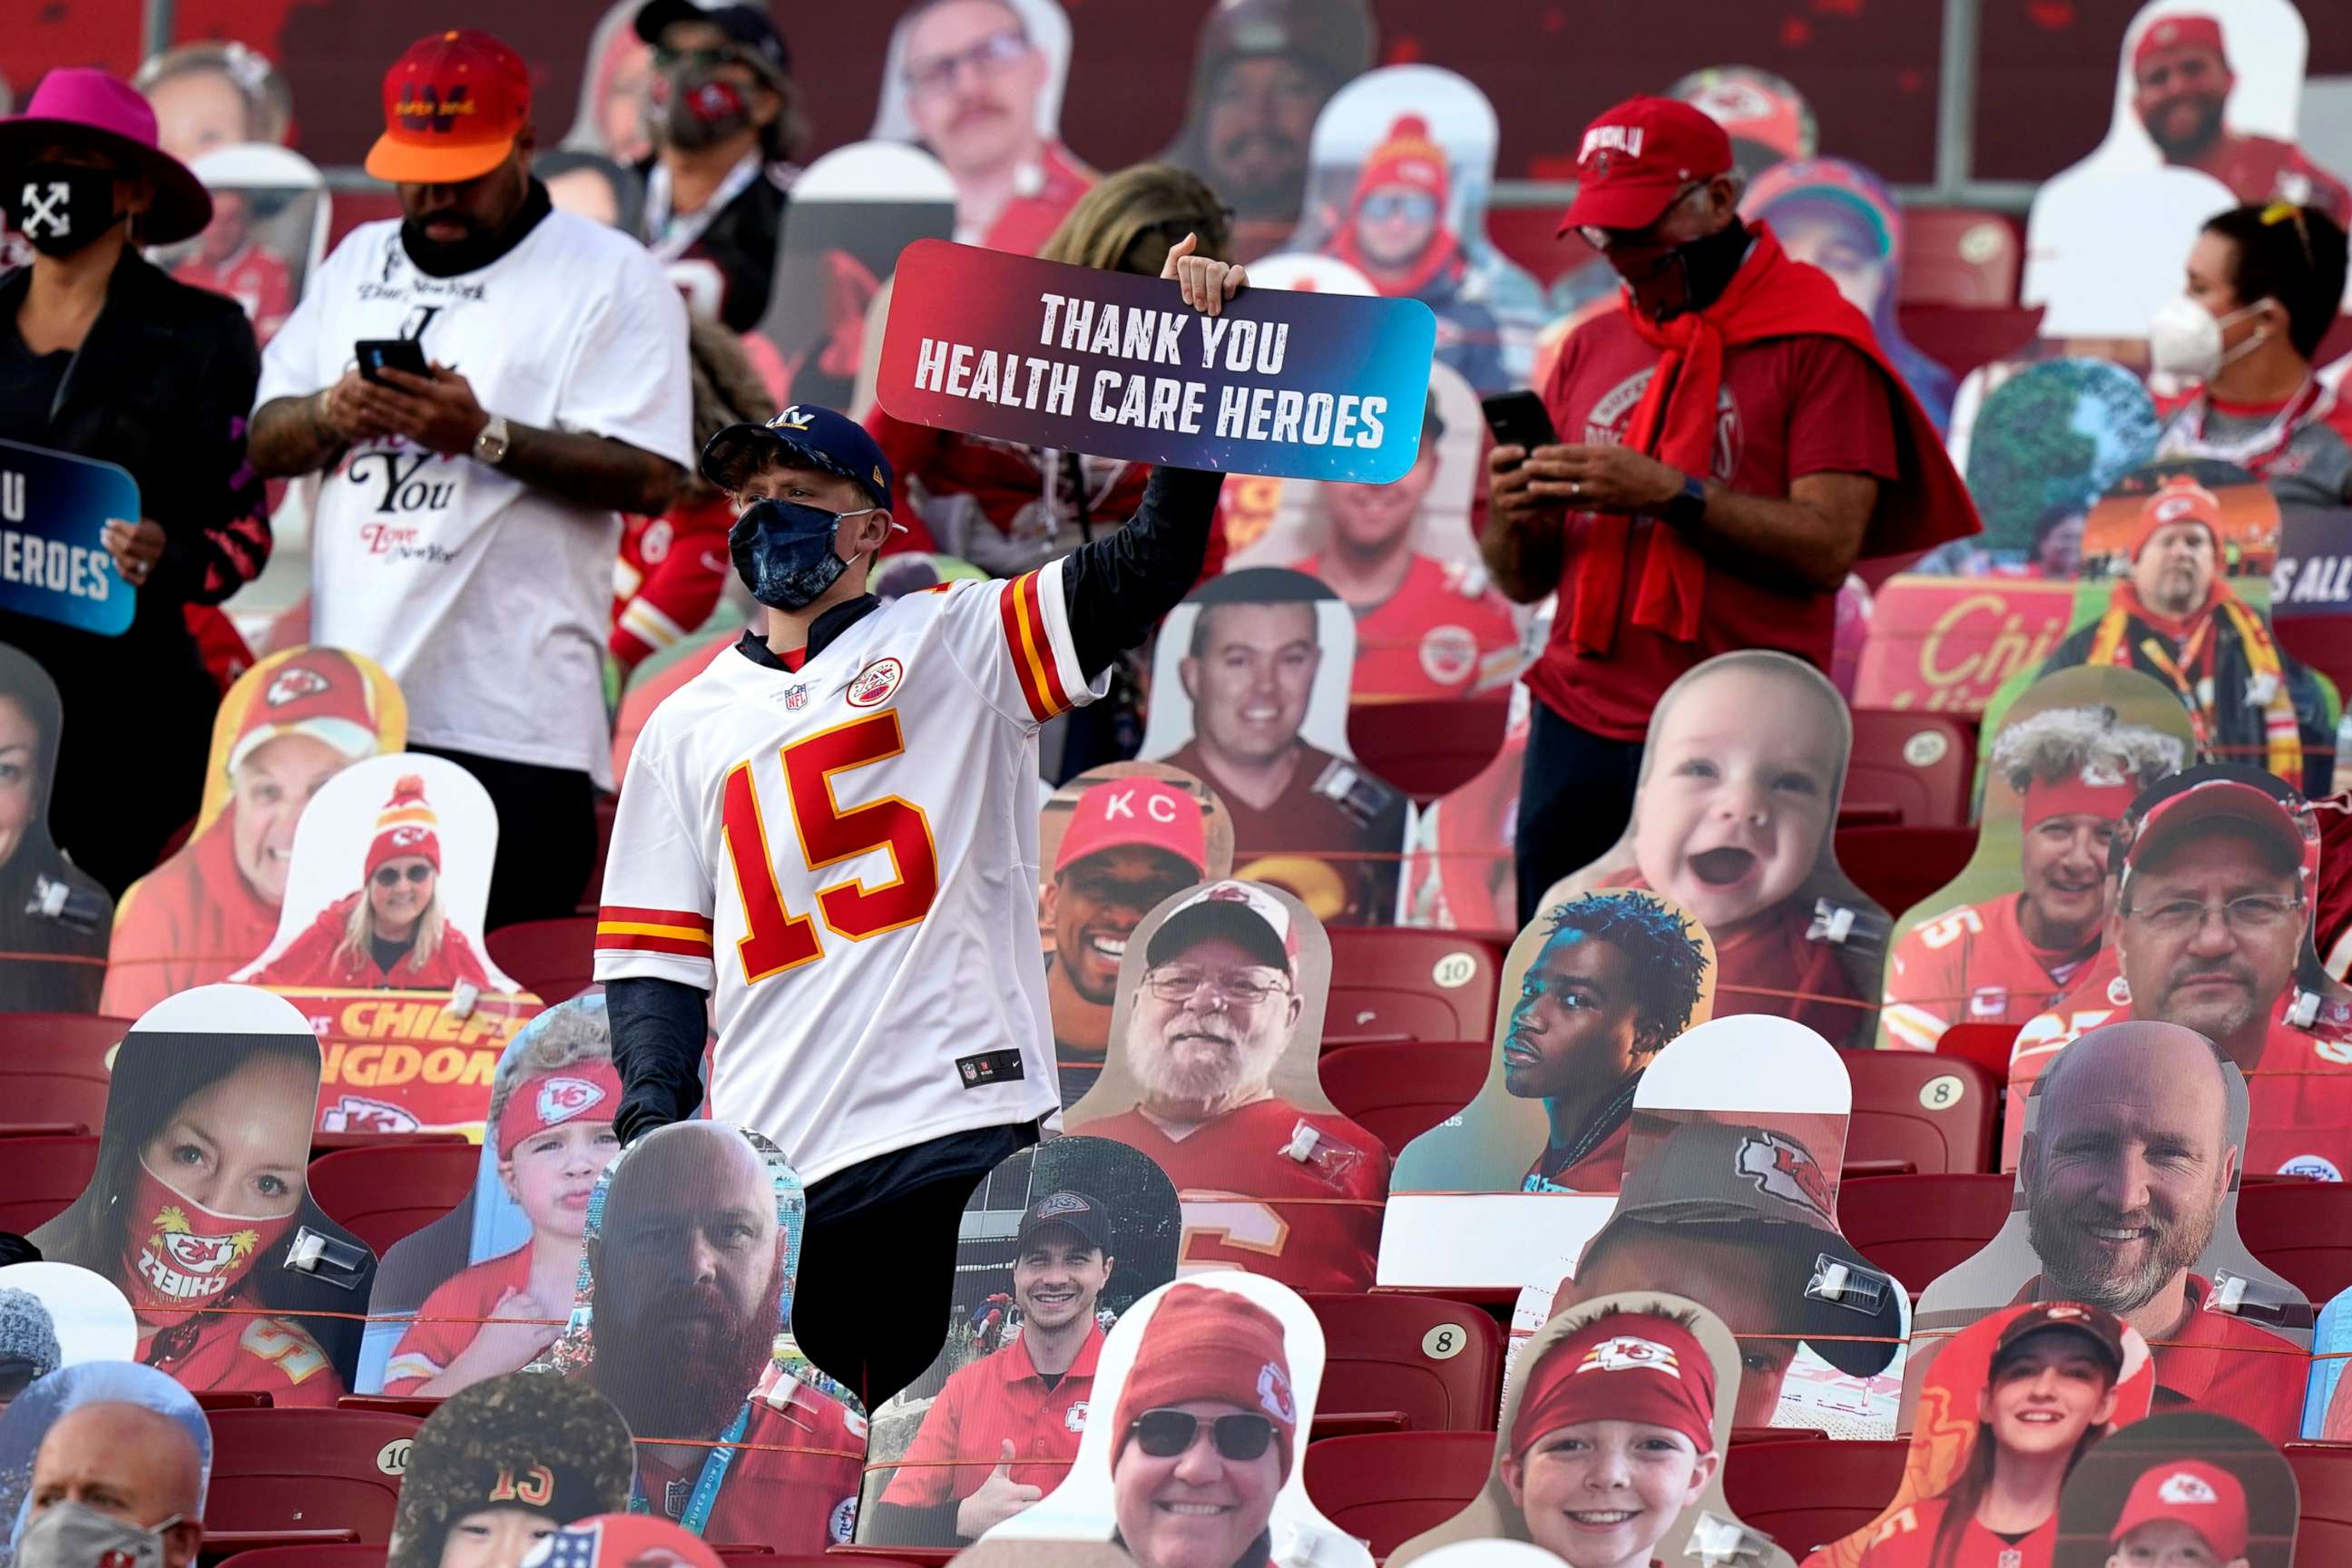 PHOTO: A fan holds up a sign honoring heart care workers before the NFL Super Bowl 55 football game between the Kansas City Chiefs and Tampa Bay Buccaneers, Feb. 7, 2021, in Tampa, Fla.